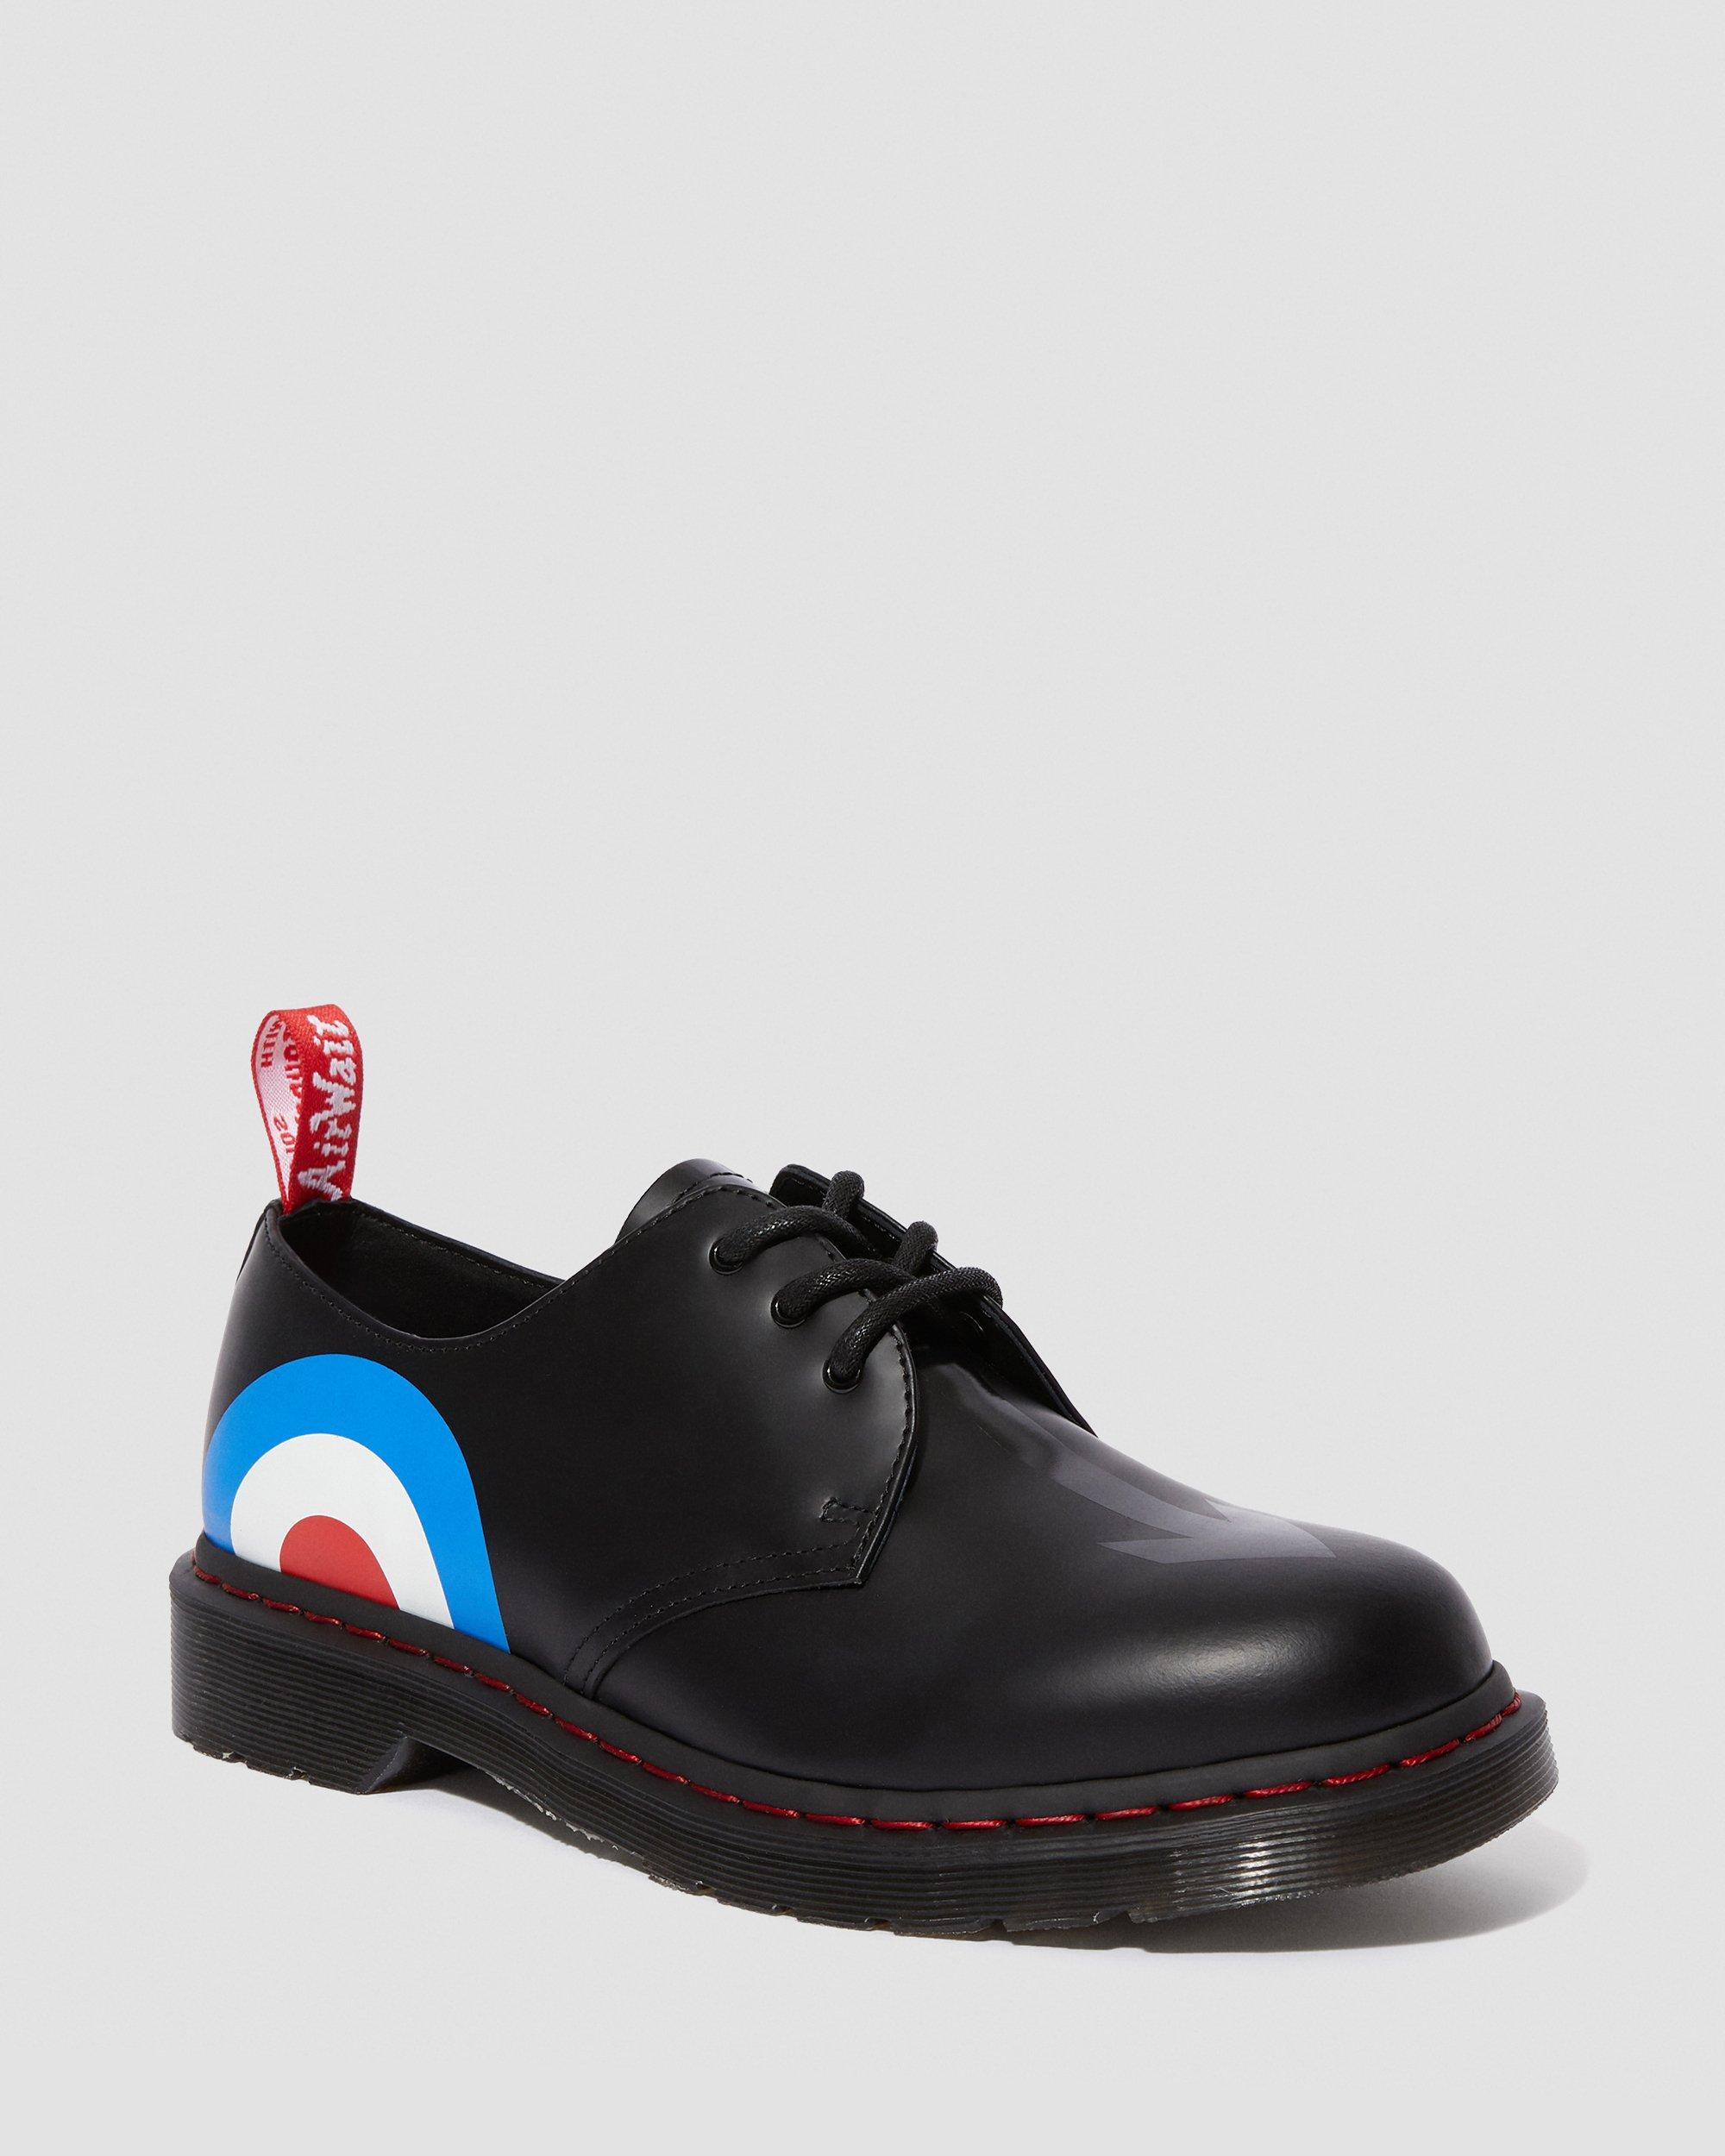 the who x dr martens